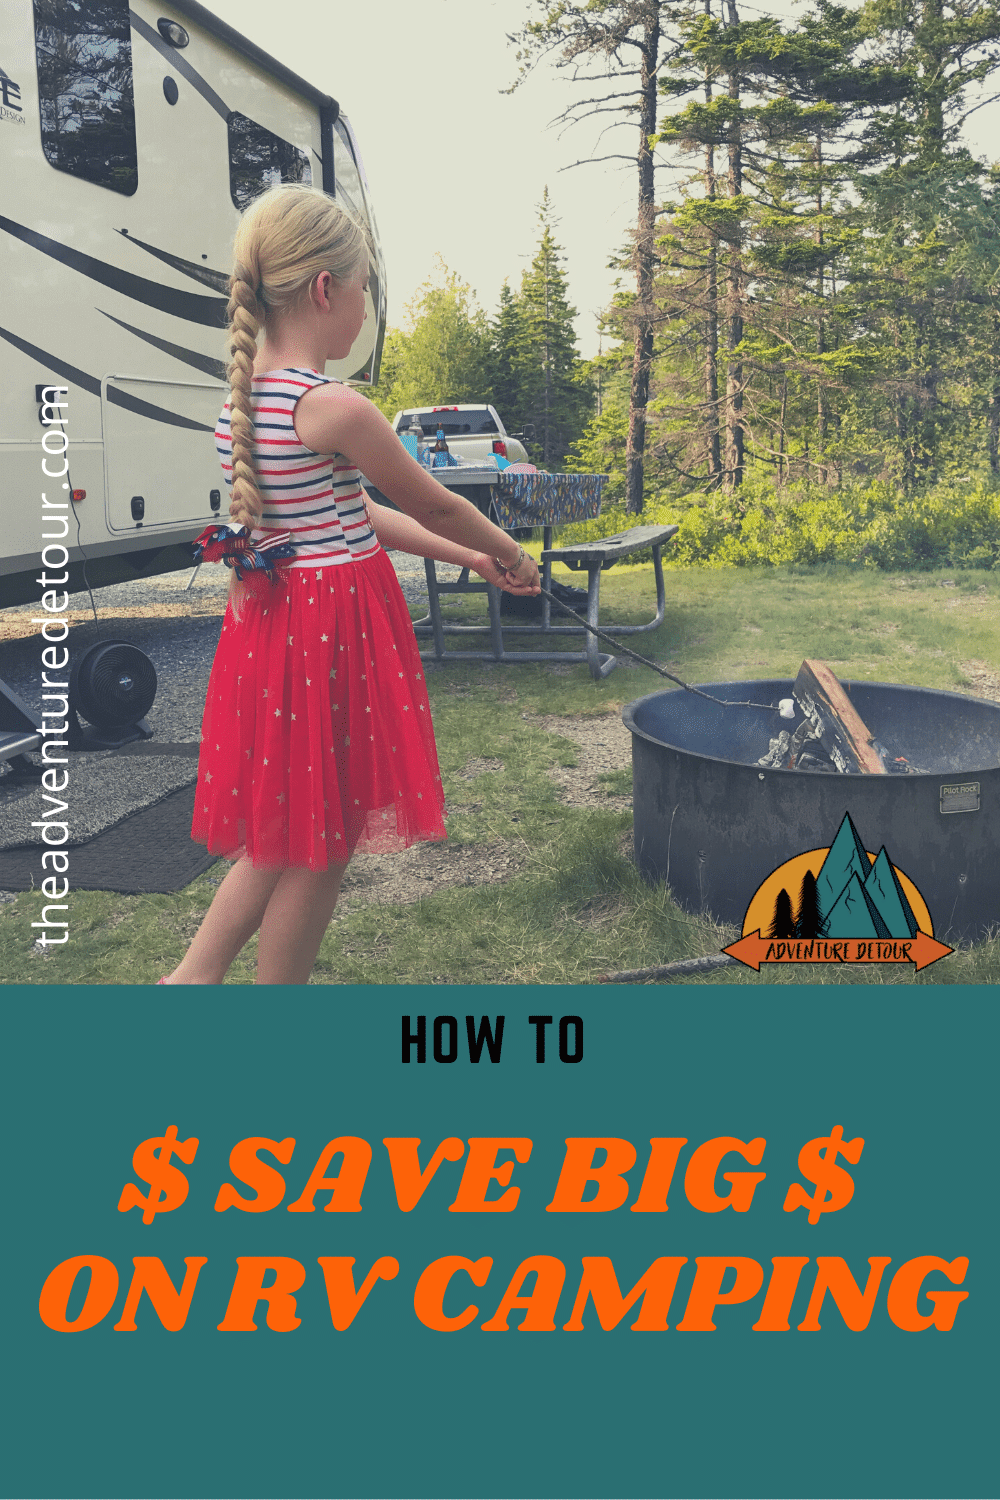 Girl Roasting Marshmallows In Campsite Save Big On RV Camping